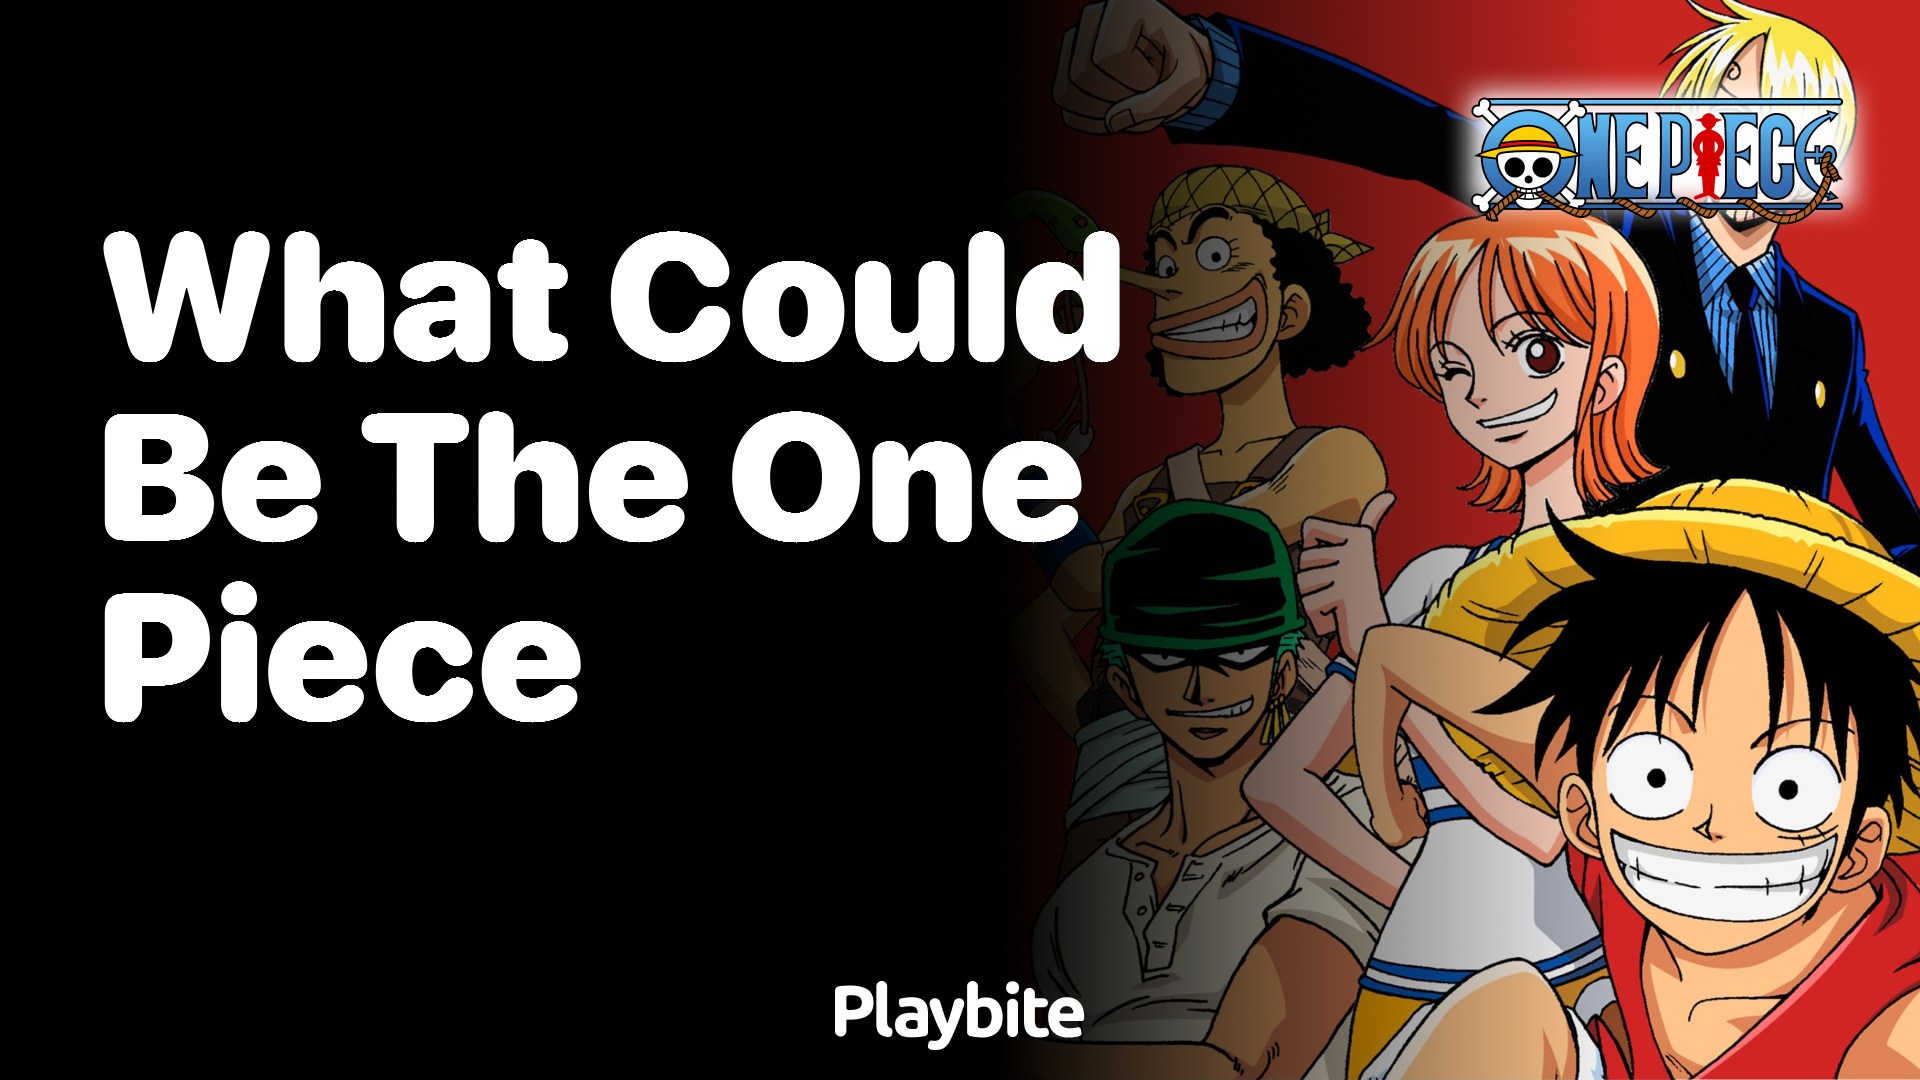 What Could the One Piece Be?